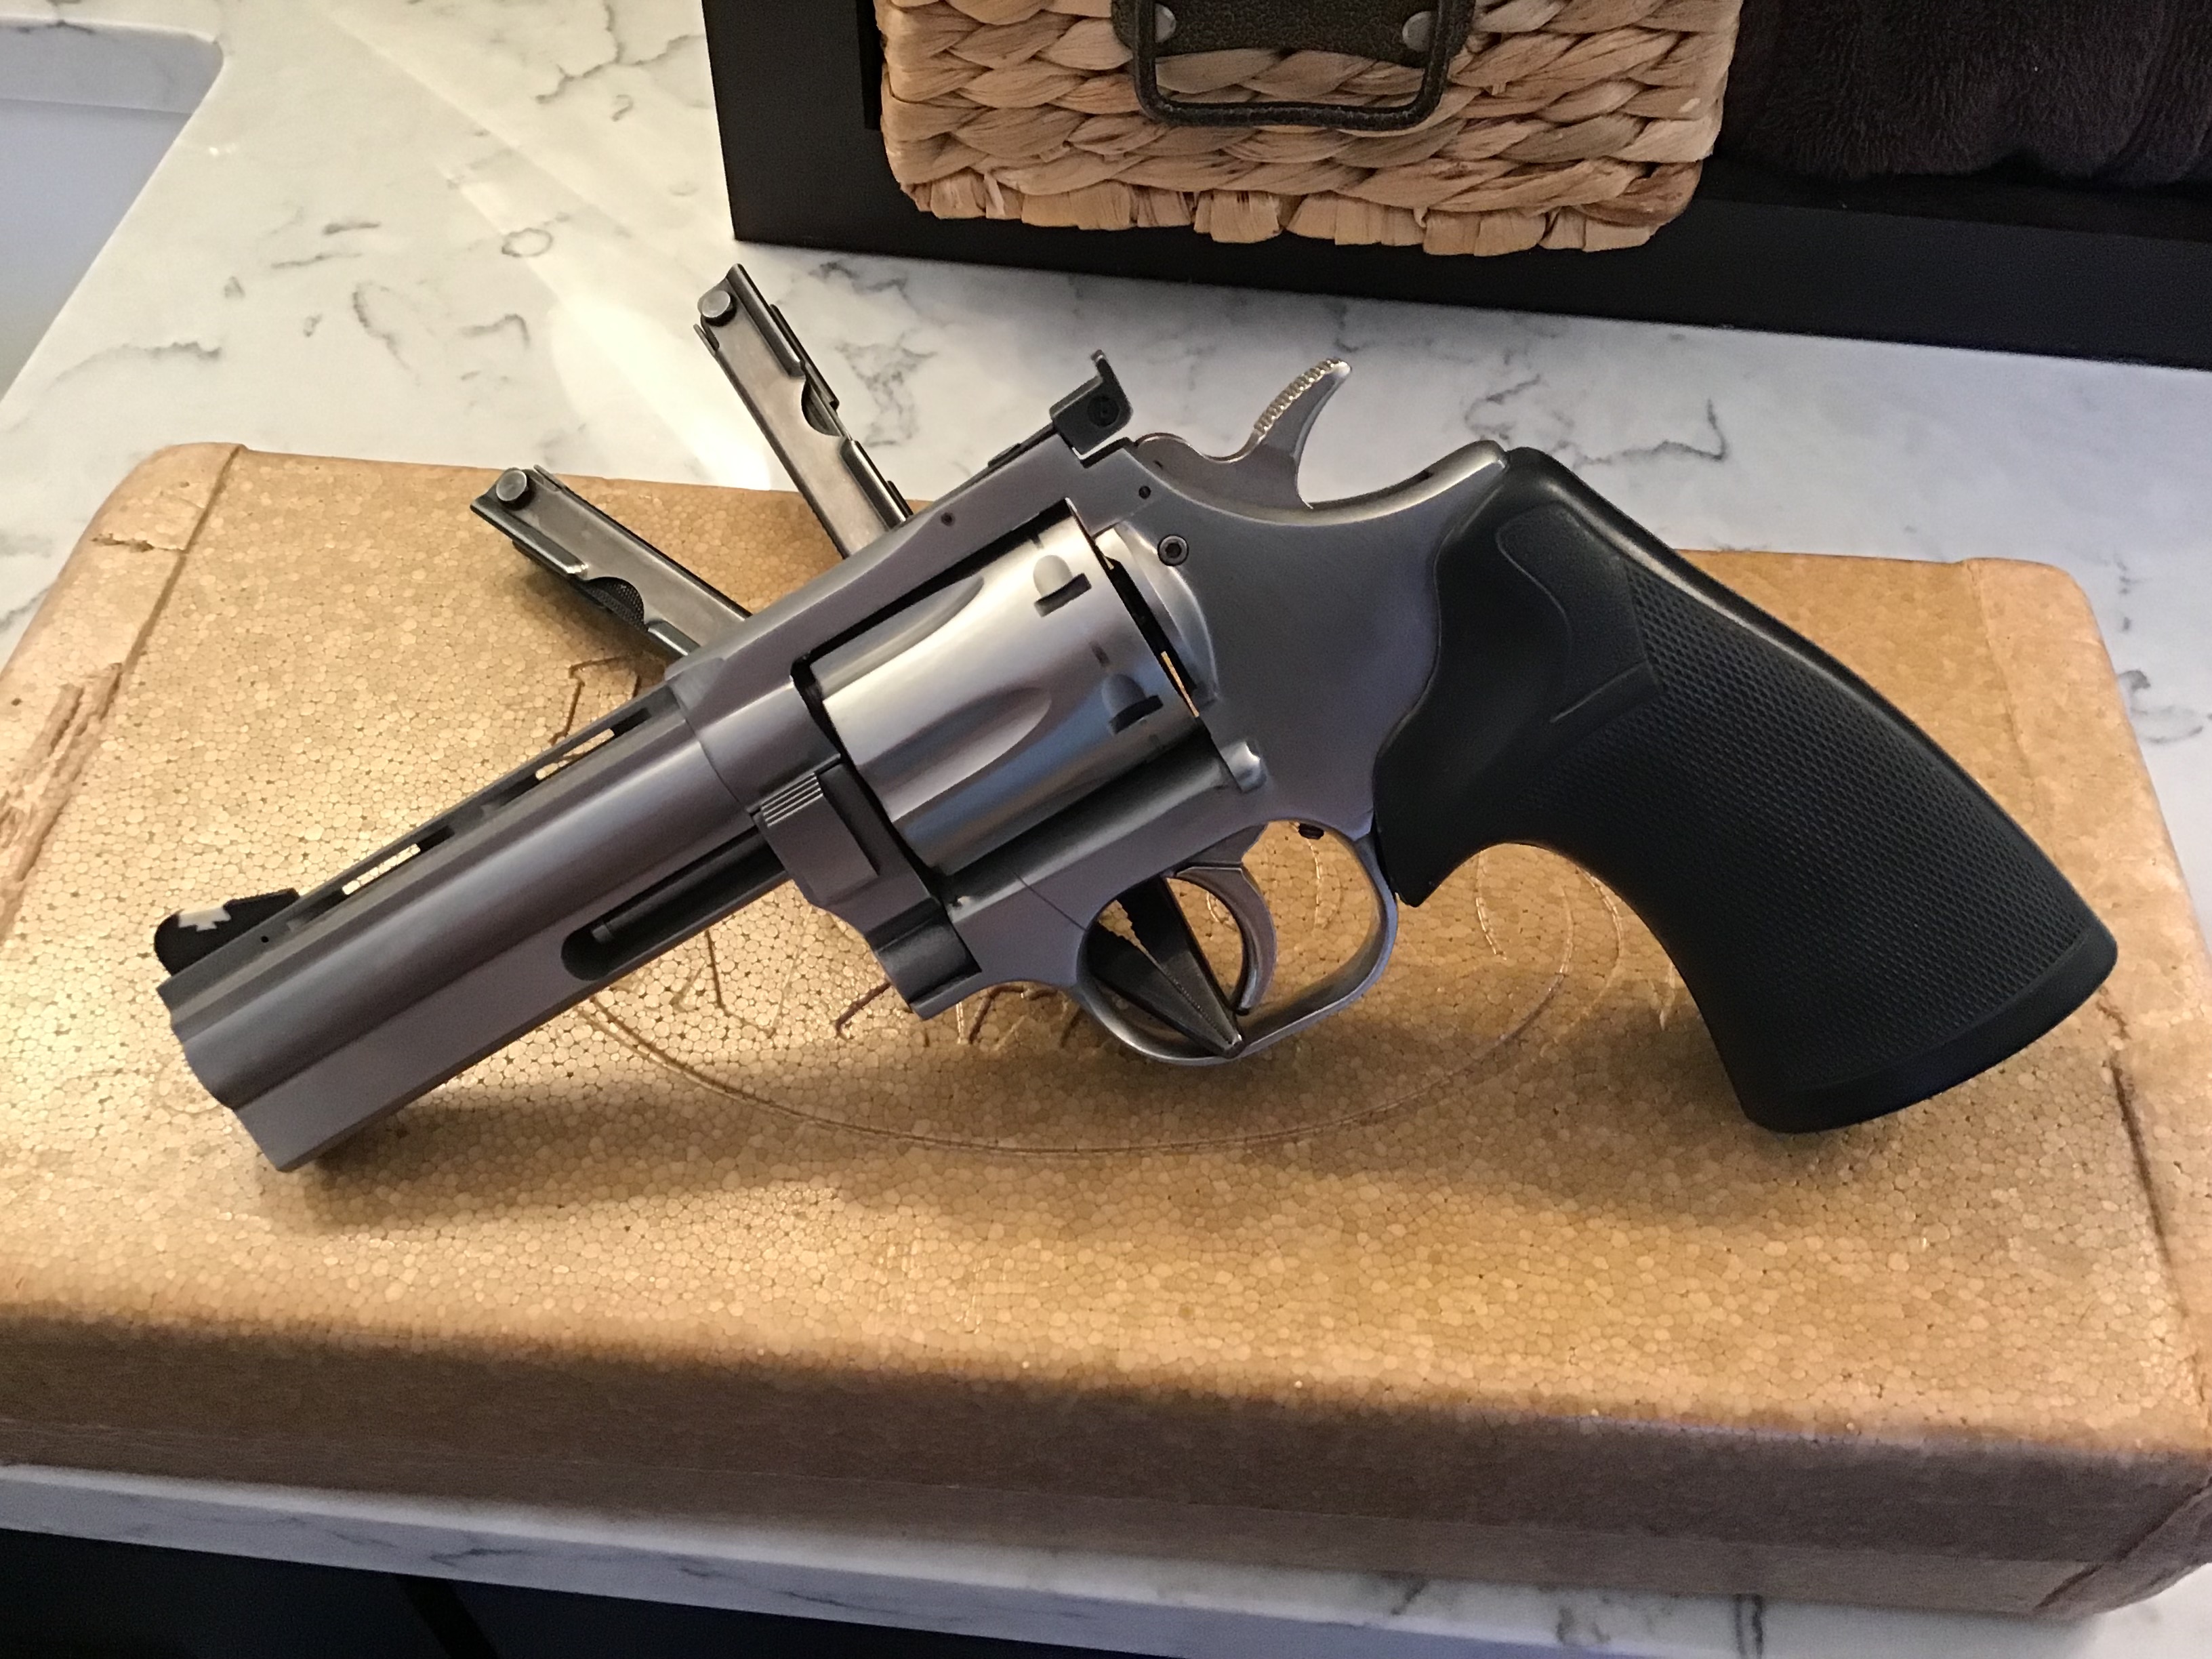 New to me…715 Dan Wesson Small Frame Revolvers Forum Dan Wesson Forum